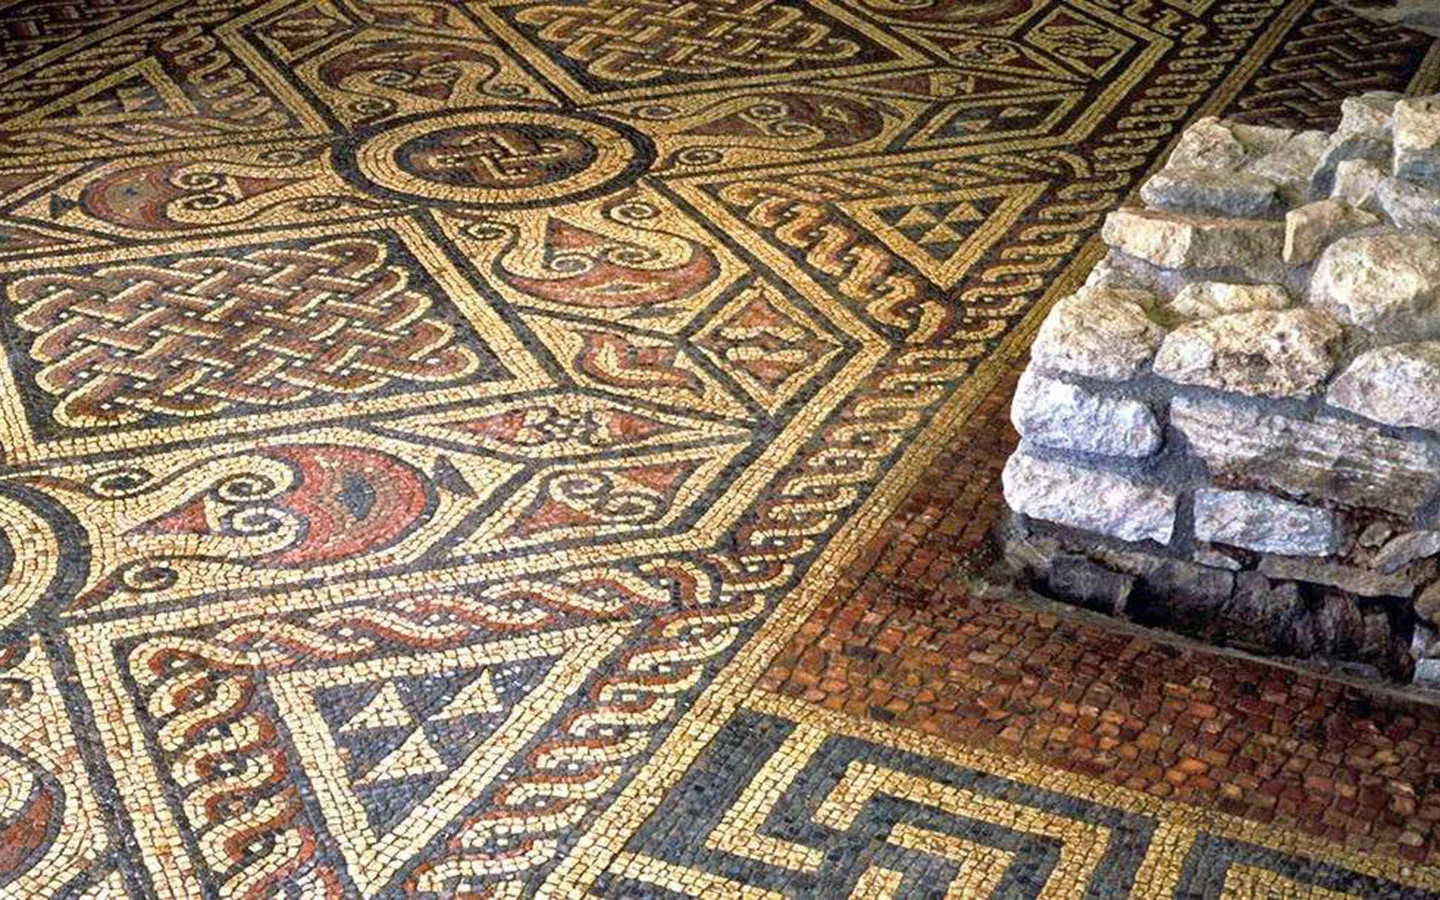 Mosaics at North Leigh Roman Villa in the Cotswolds